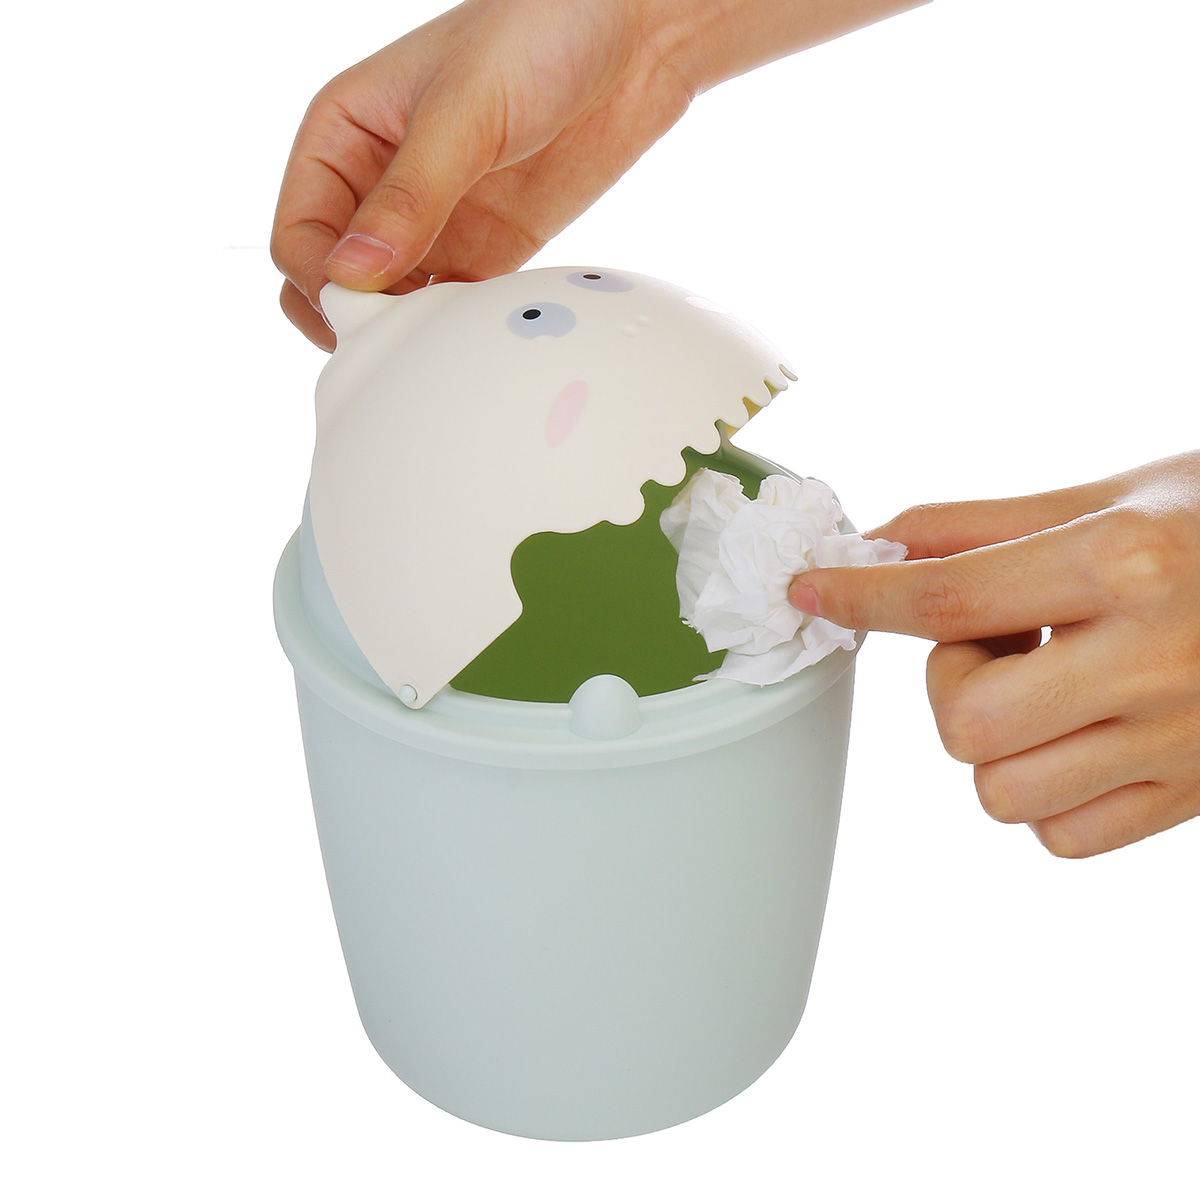 Mini-Small-Waste-Bin-Desktop-Garbage-Basket-Table-Home-Office-Trash-Can-with-Lid-1684662